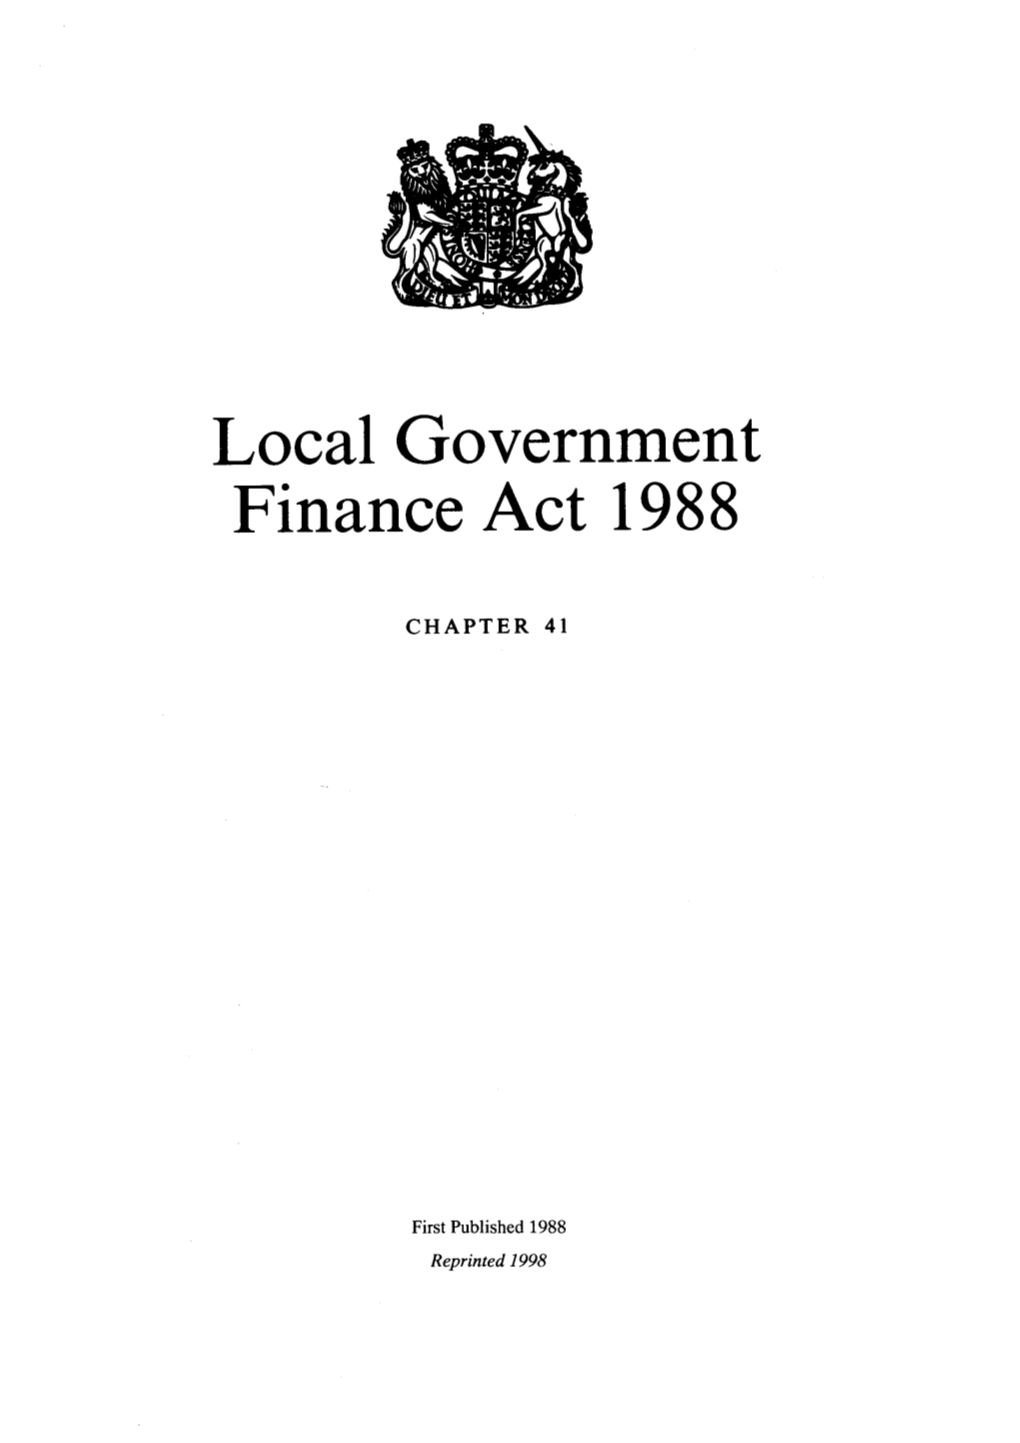 Local Government Finance Act 1988